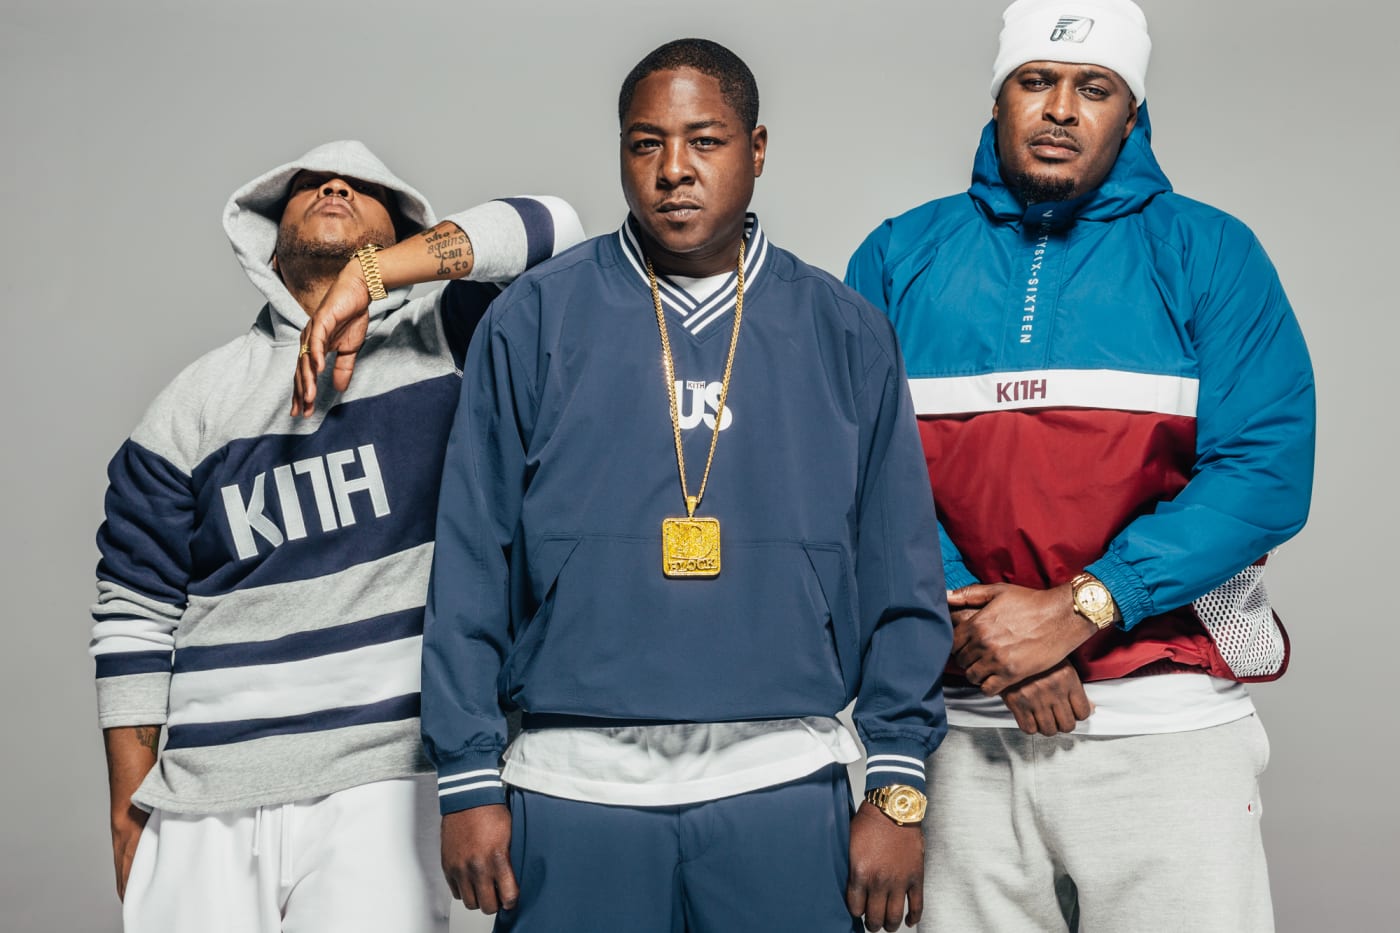 This is Kith's 96 Collection campaign featuring The Lox.